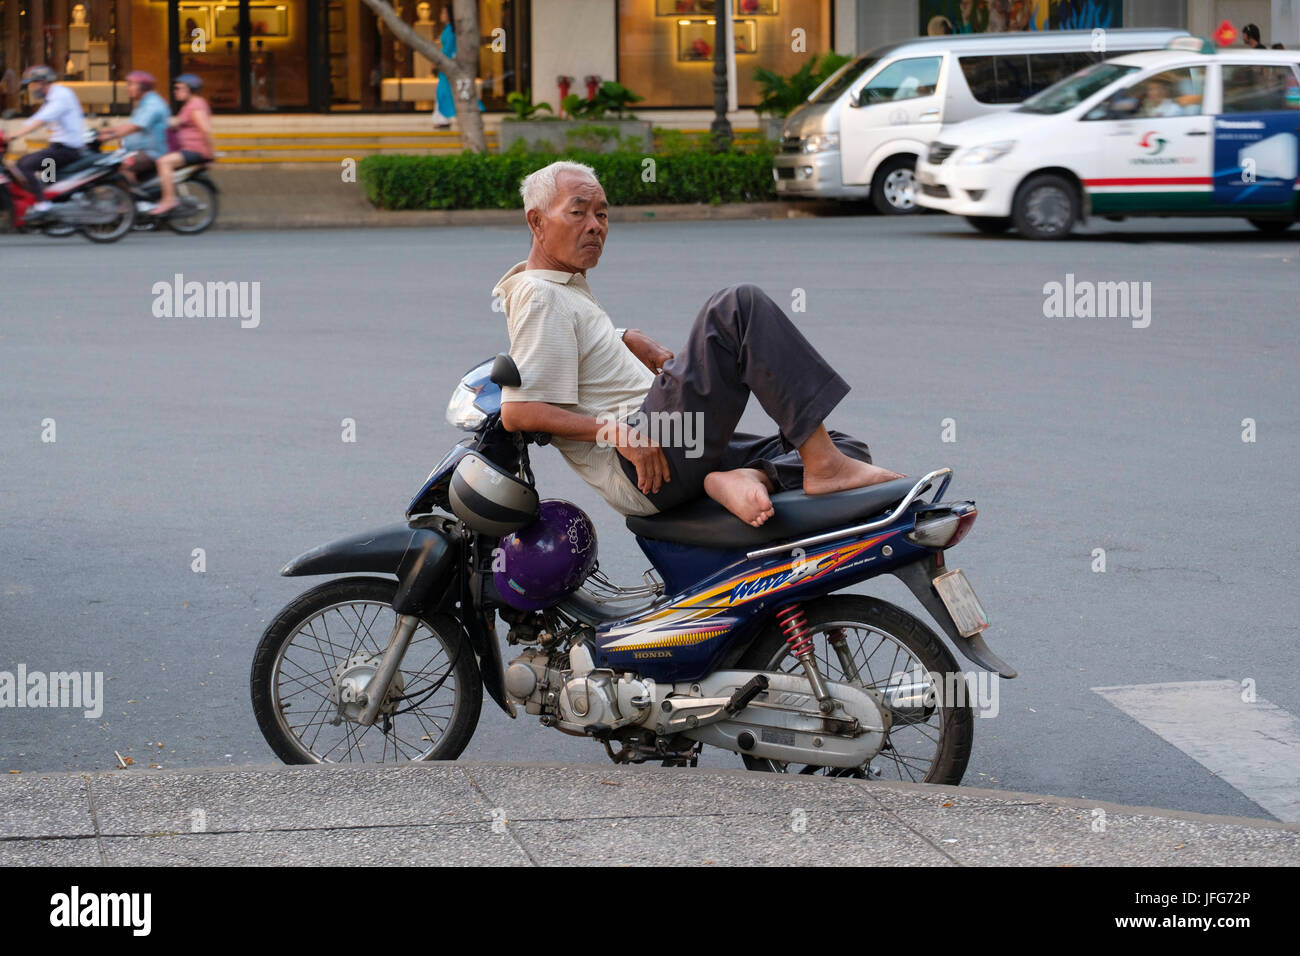 Old vietnamese man resting on this motorcycle Stock Photo